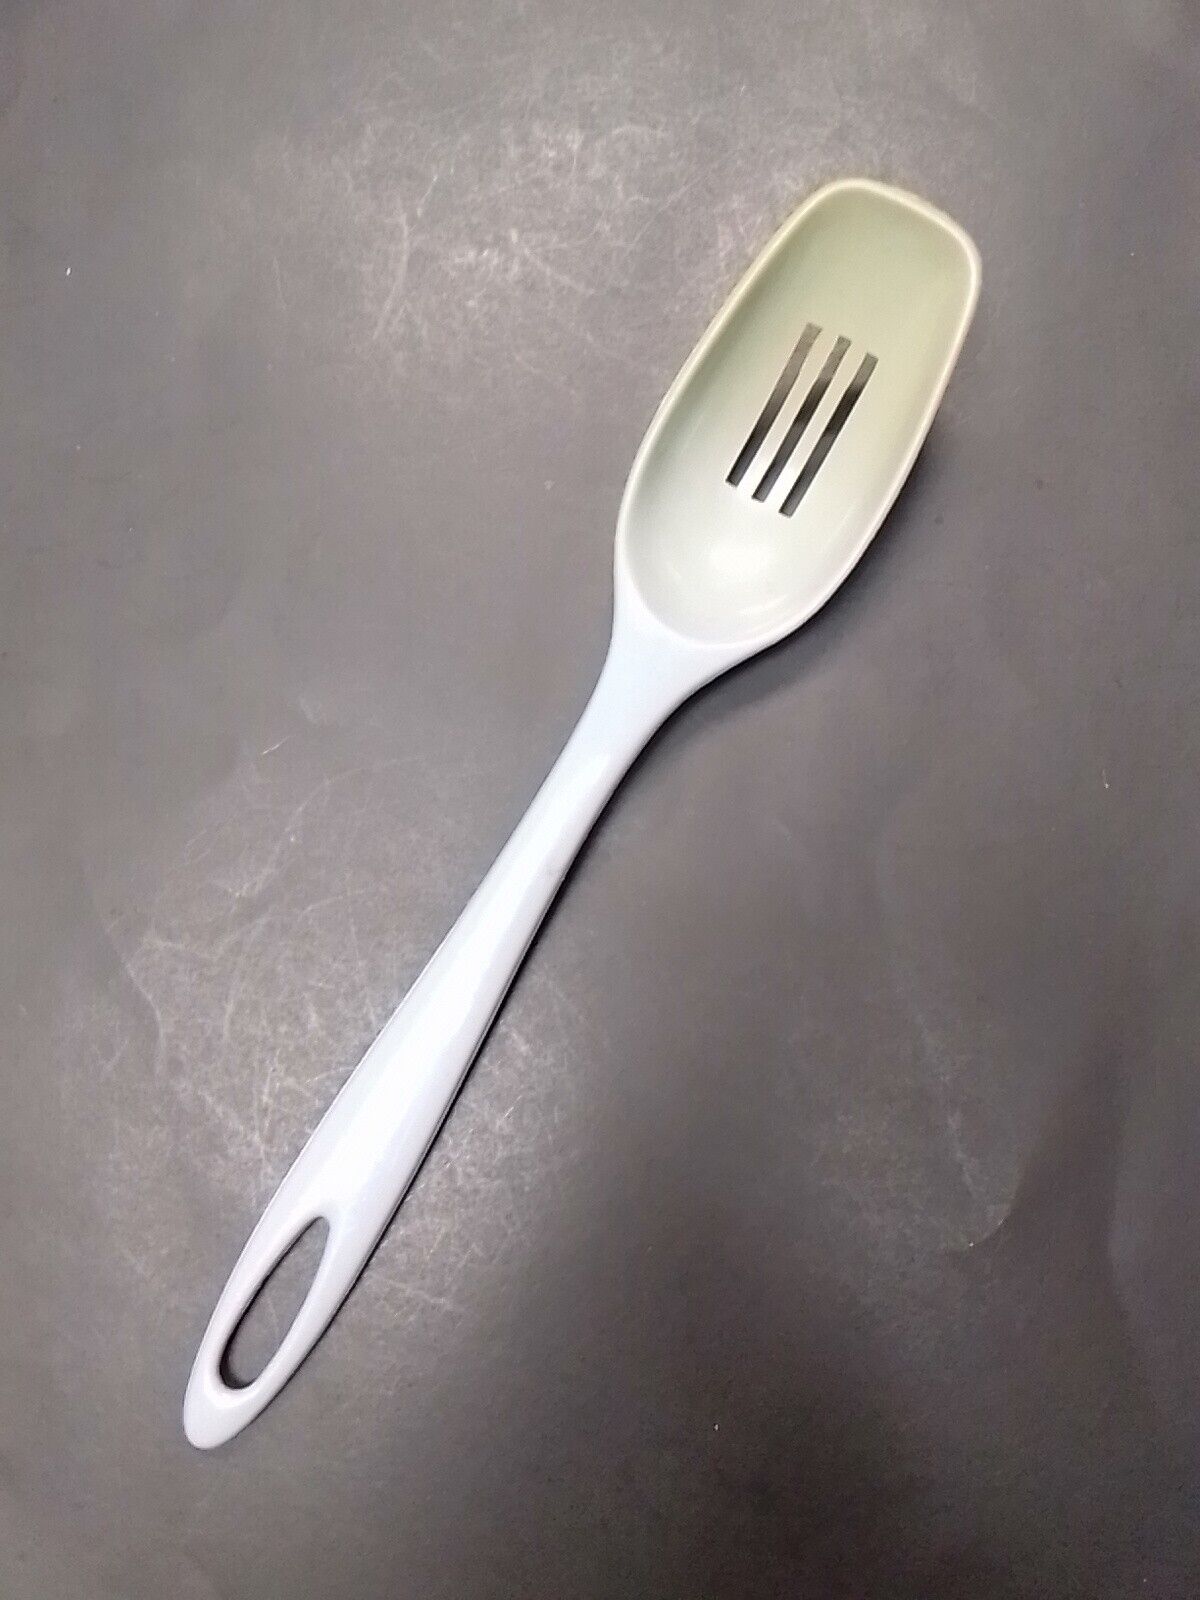 Vintage Ensar Corp USA Light Blue Slotted Spoon For Cooking tomato stains wear